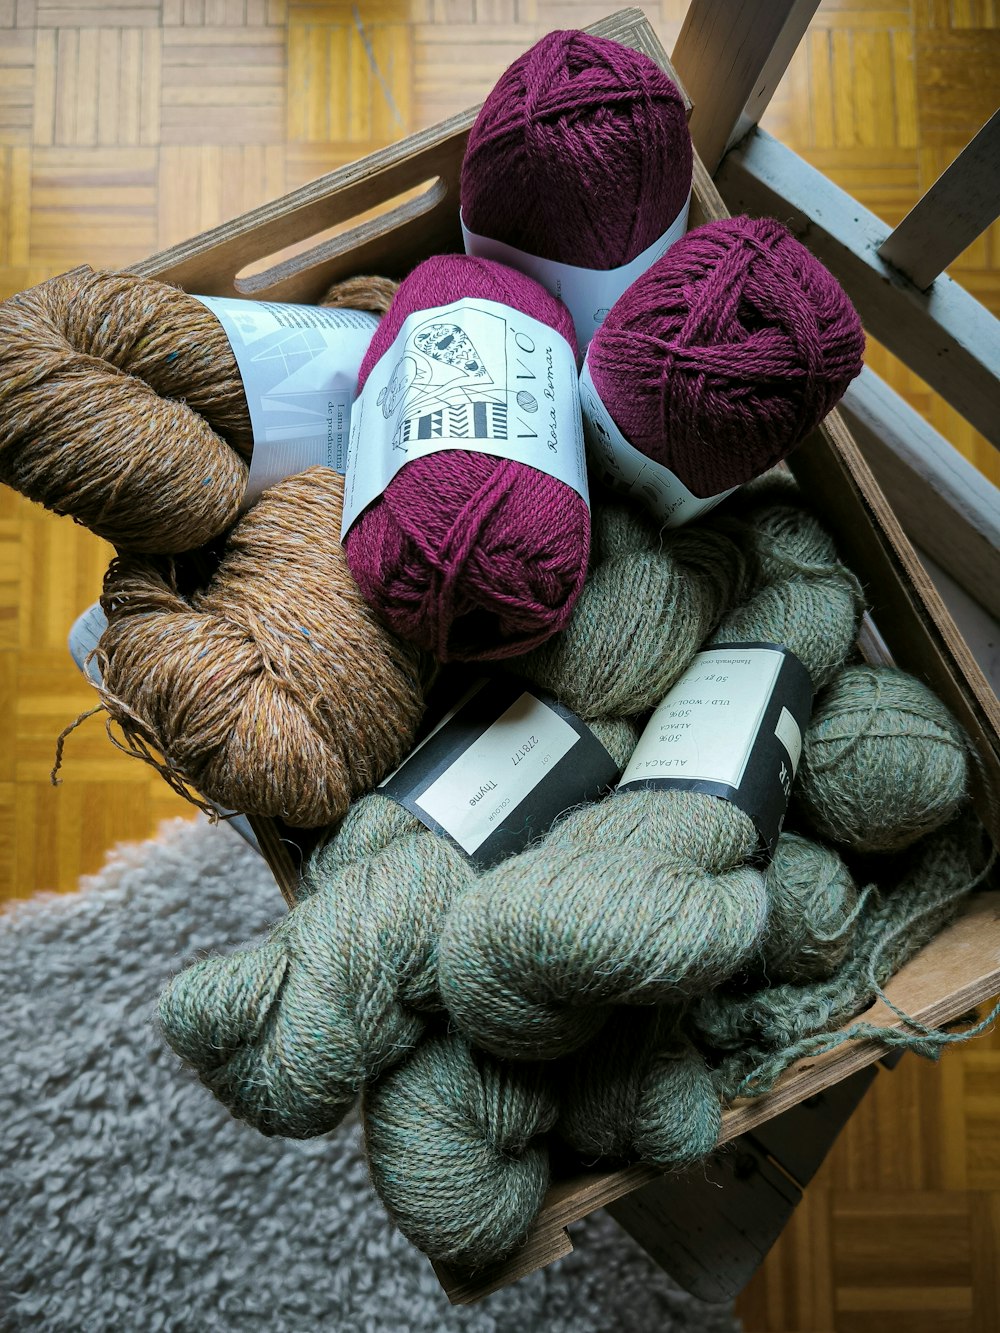 a wooden crate filled with balls of yarn